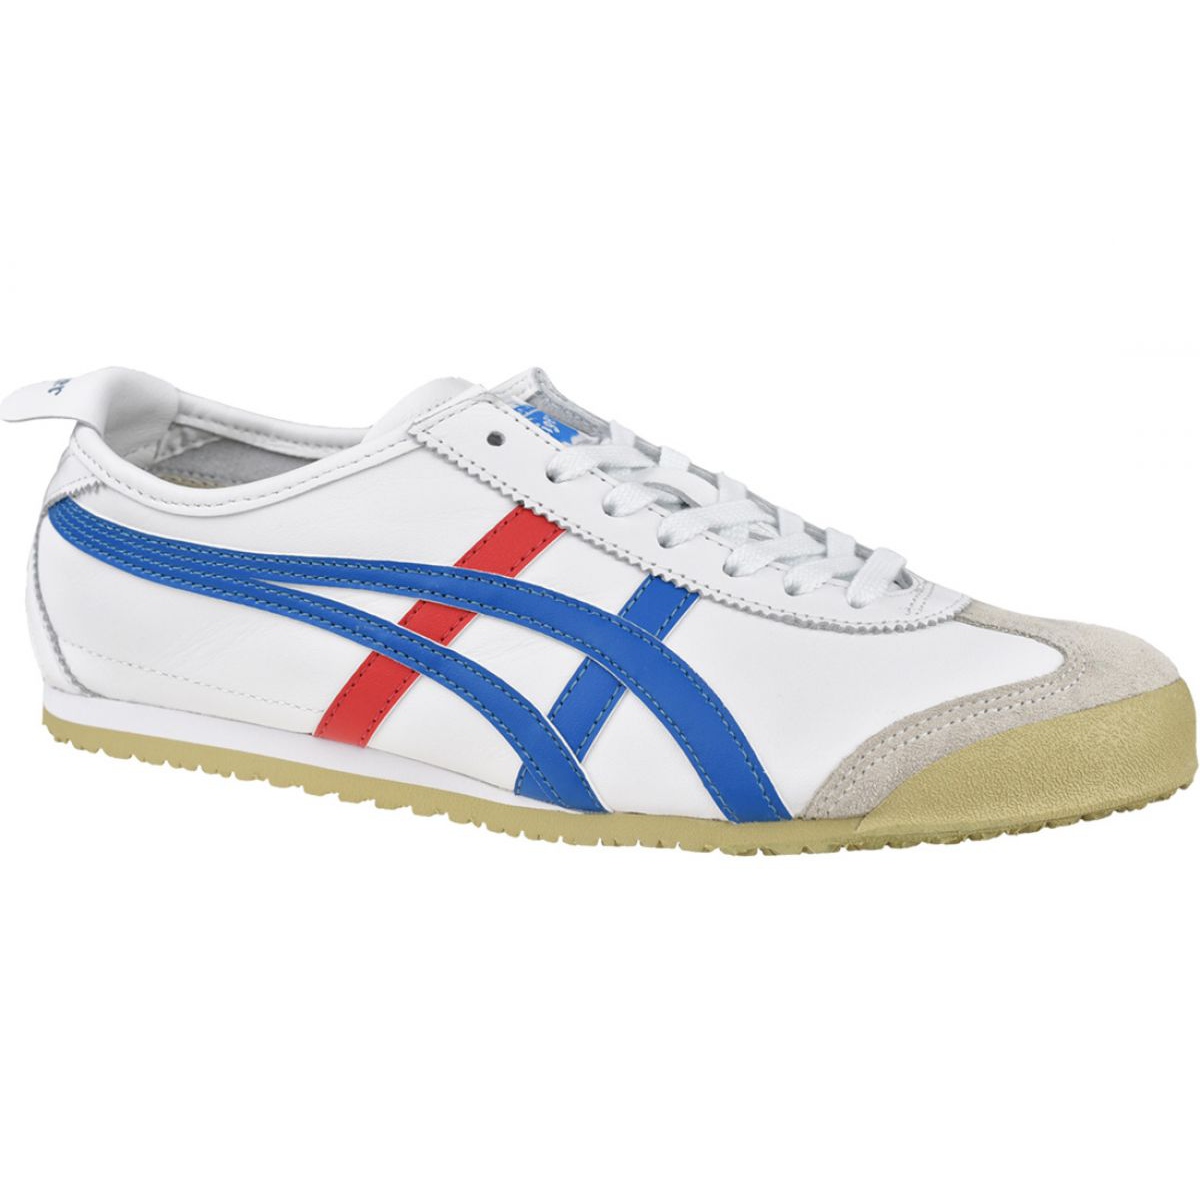 Asics Onitsuka Tiger Mexico 66 M DL408-0146 shoes white - KeeShoes